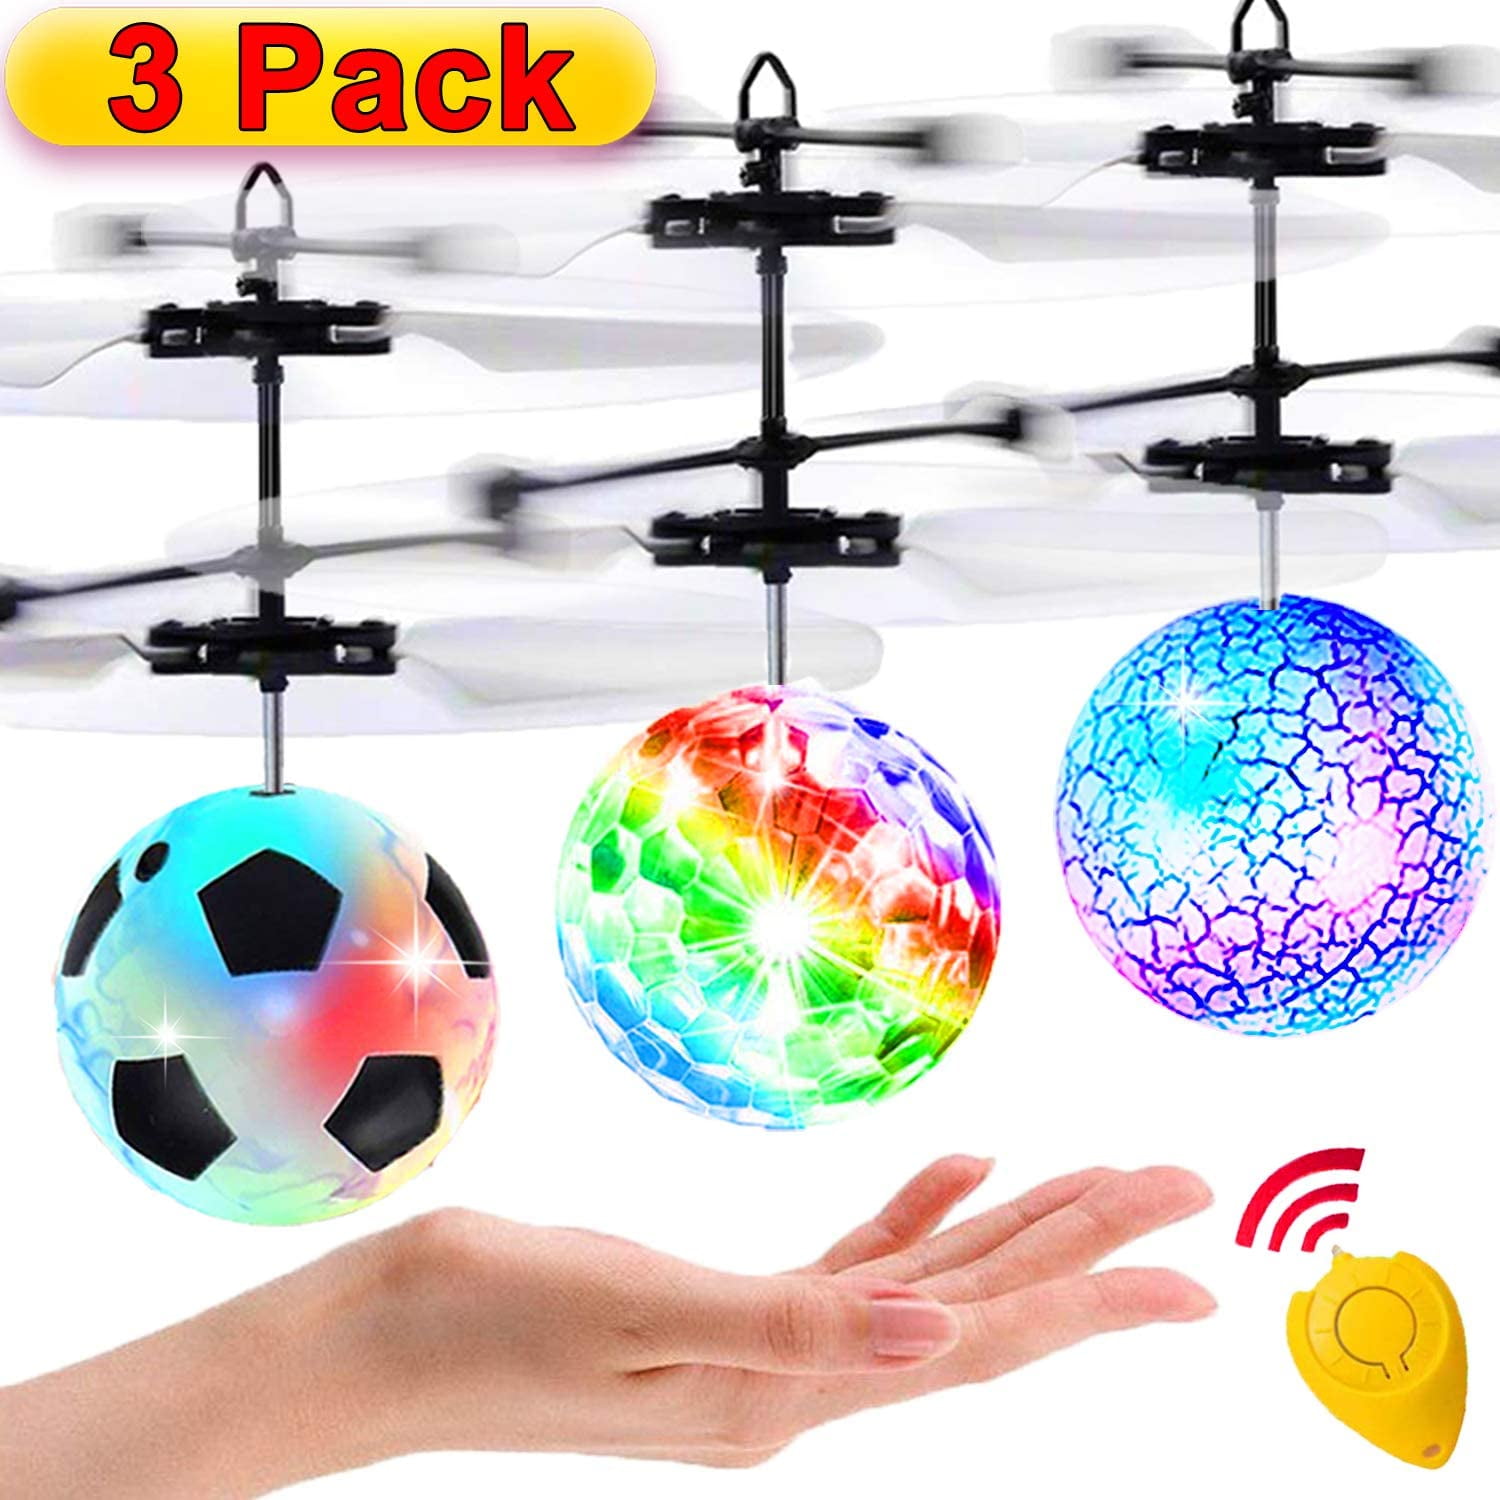 Mini Flying Ball Drone Helicopter 2 Pack Flying Ball Toys Best Teenage Boys Girls Present Gift Infrared Induction Light Up RC Flying Toys for 4 5 6 7 8 9 10+ Year Old Boys Girls Twins 